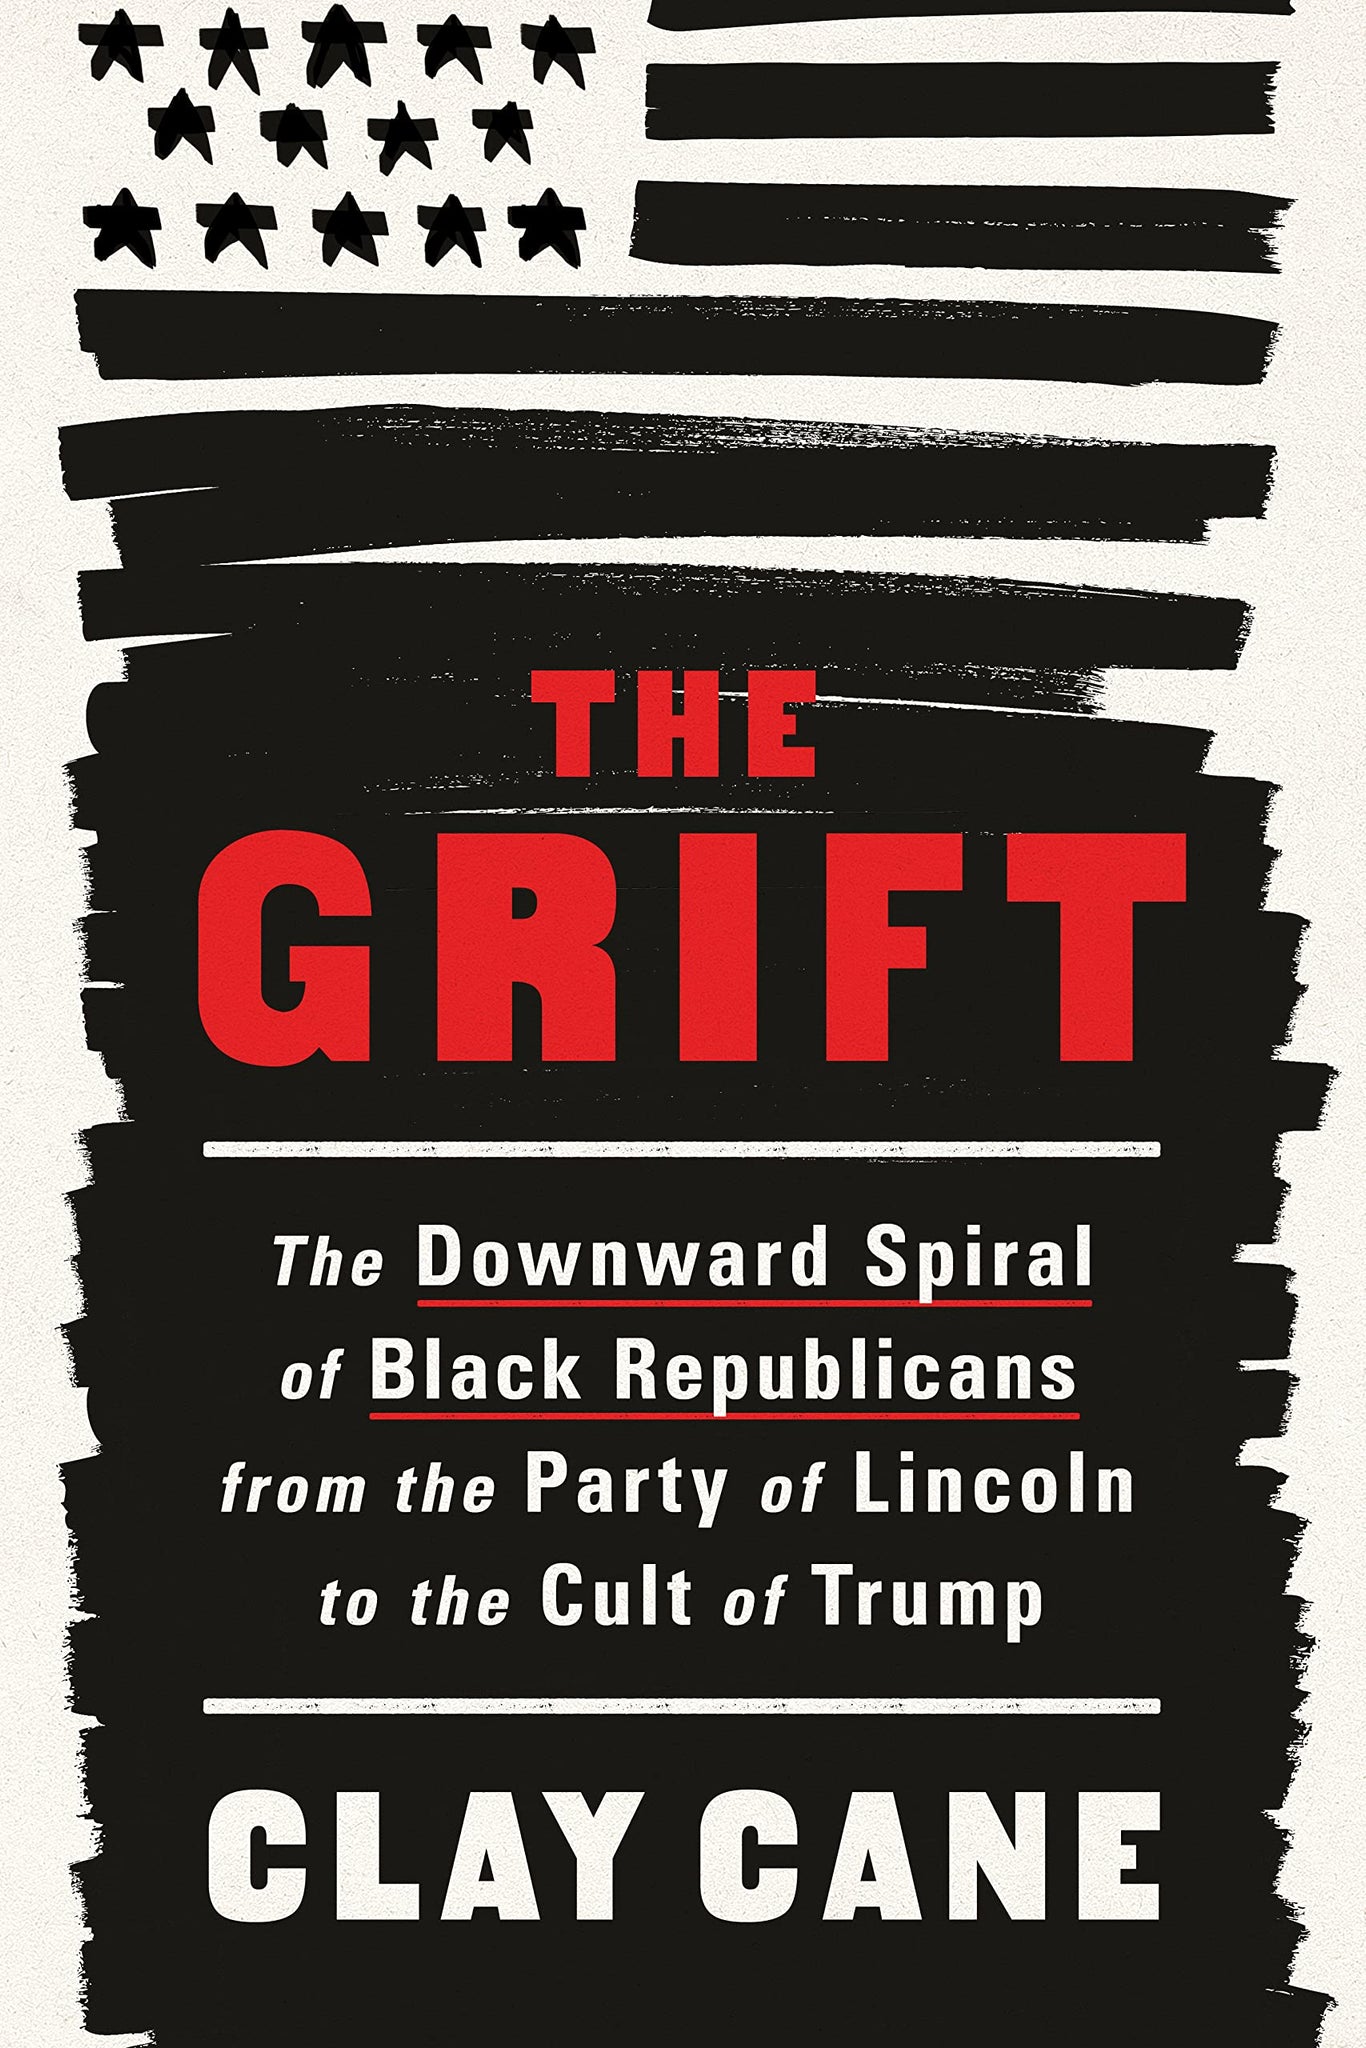 The Grift: The Downward Spiral of Black Republicans from the Party of Lincoln to the Cult of Trump (Hardcover)